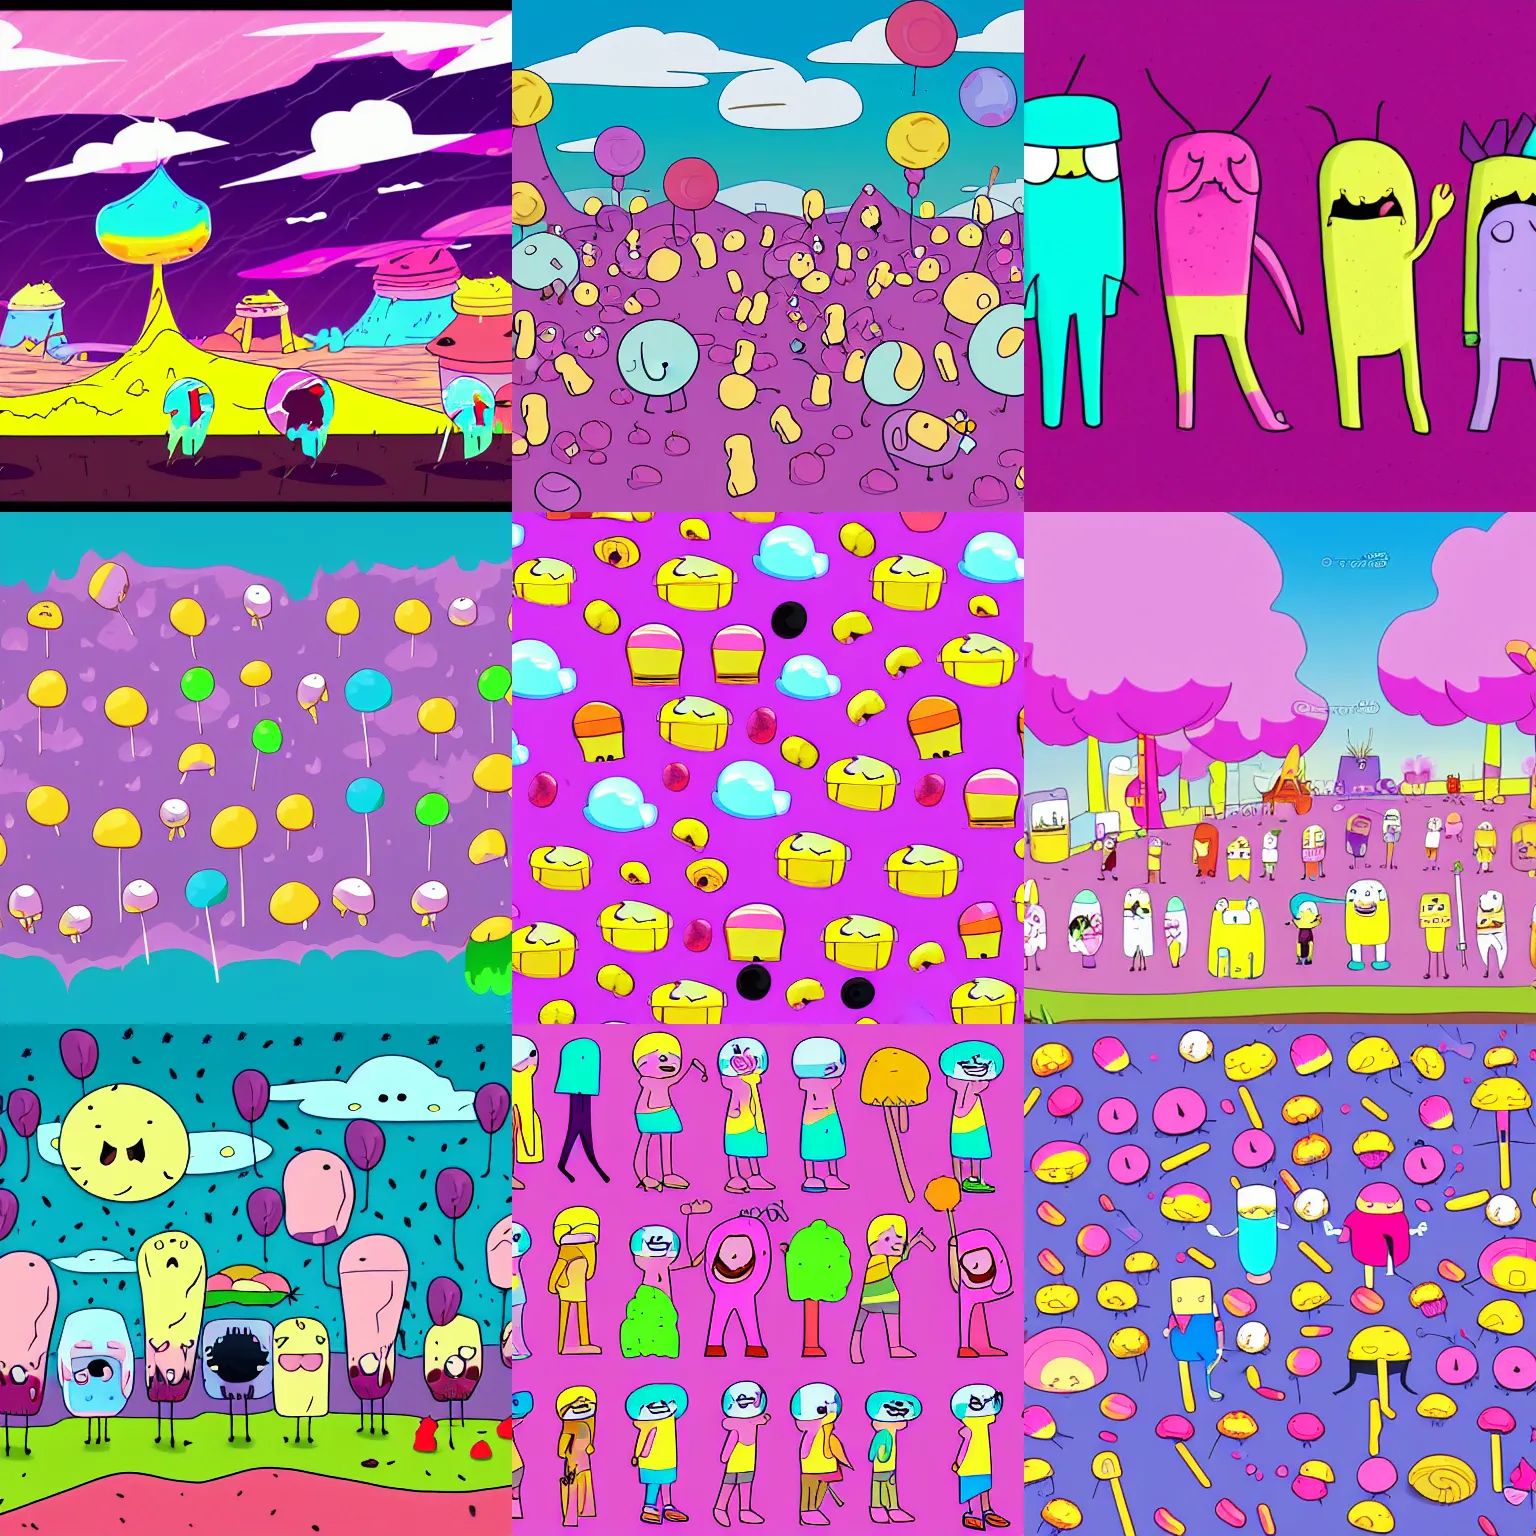 Prompt: candy people cartoon in the style of adventure time, all of the people are deserts or candy, the ground is made out of cotton candy, the sky's light purple with a mix of pink